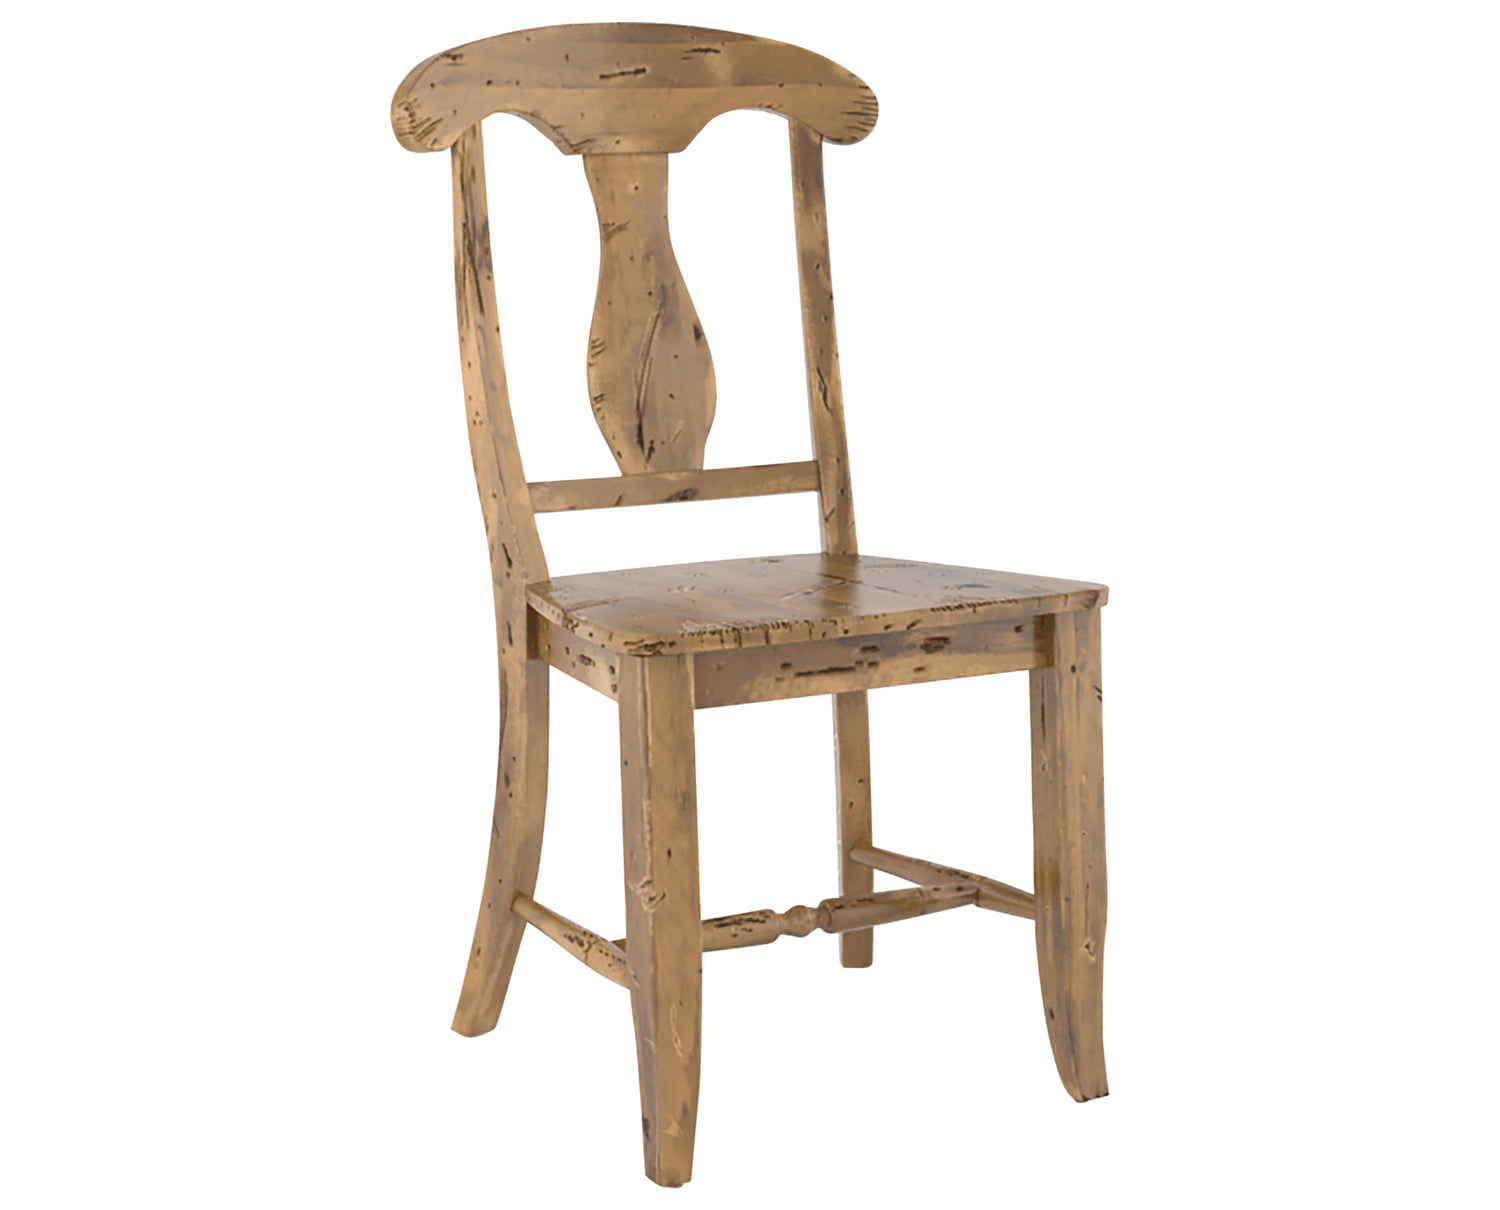 Oak Washed | Canadel Champlain Dining Chair 0600 | Valley Ridge Furniture